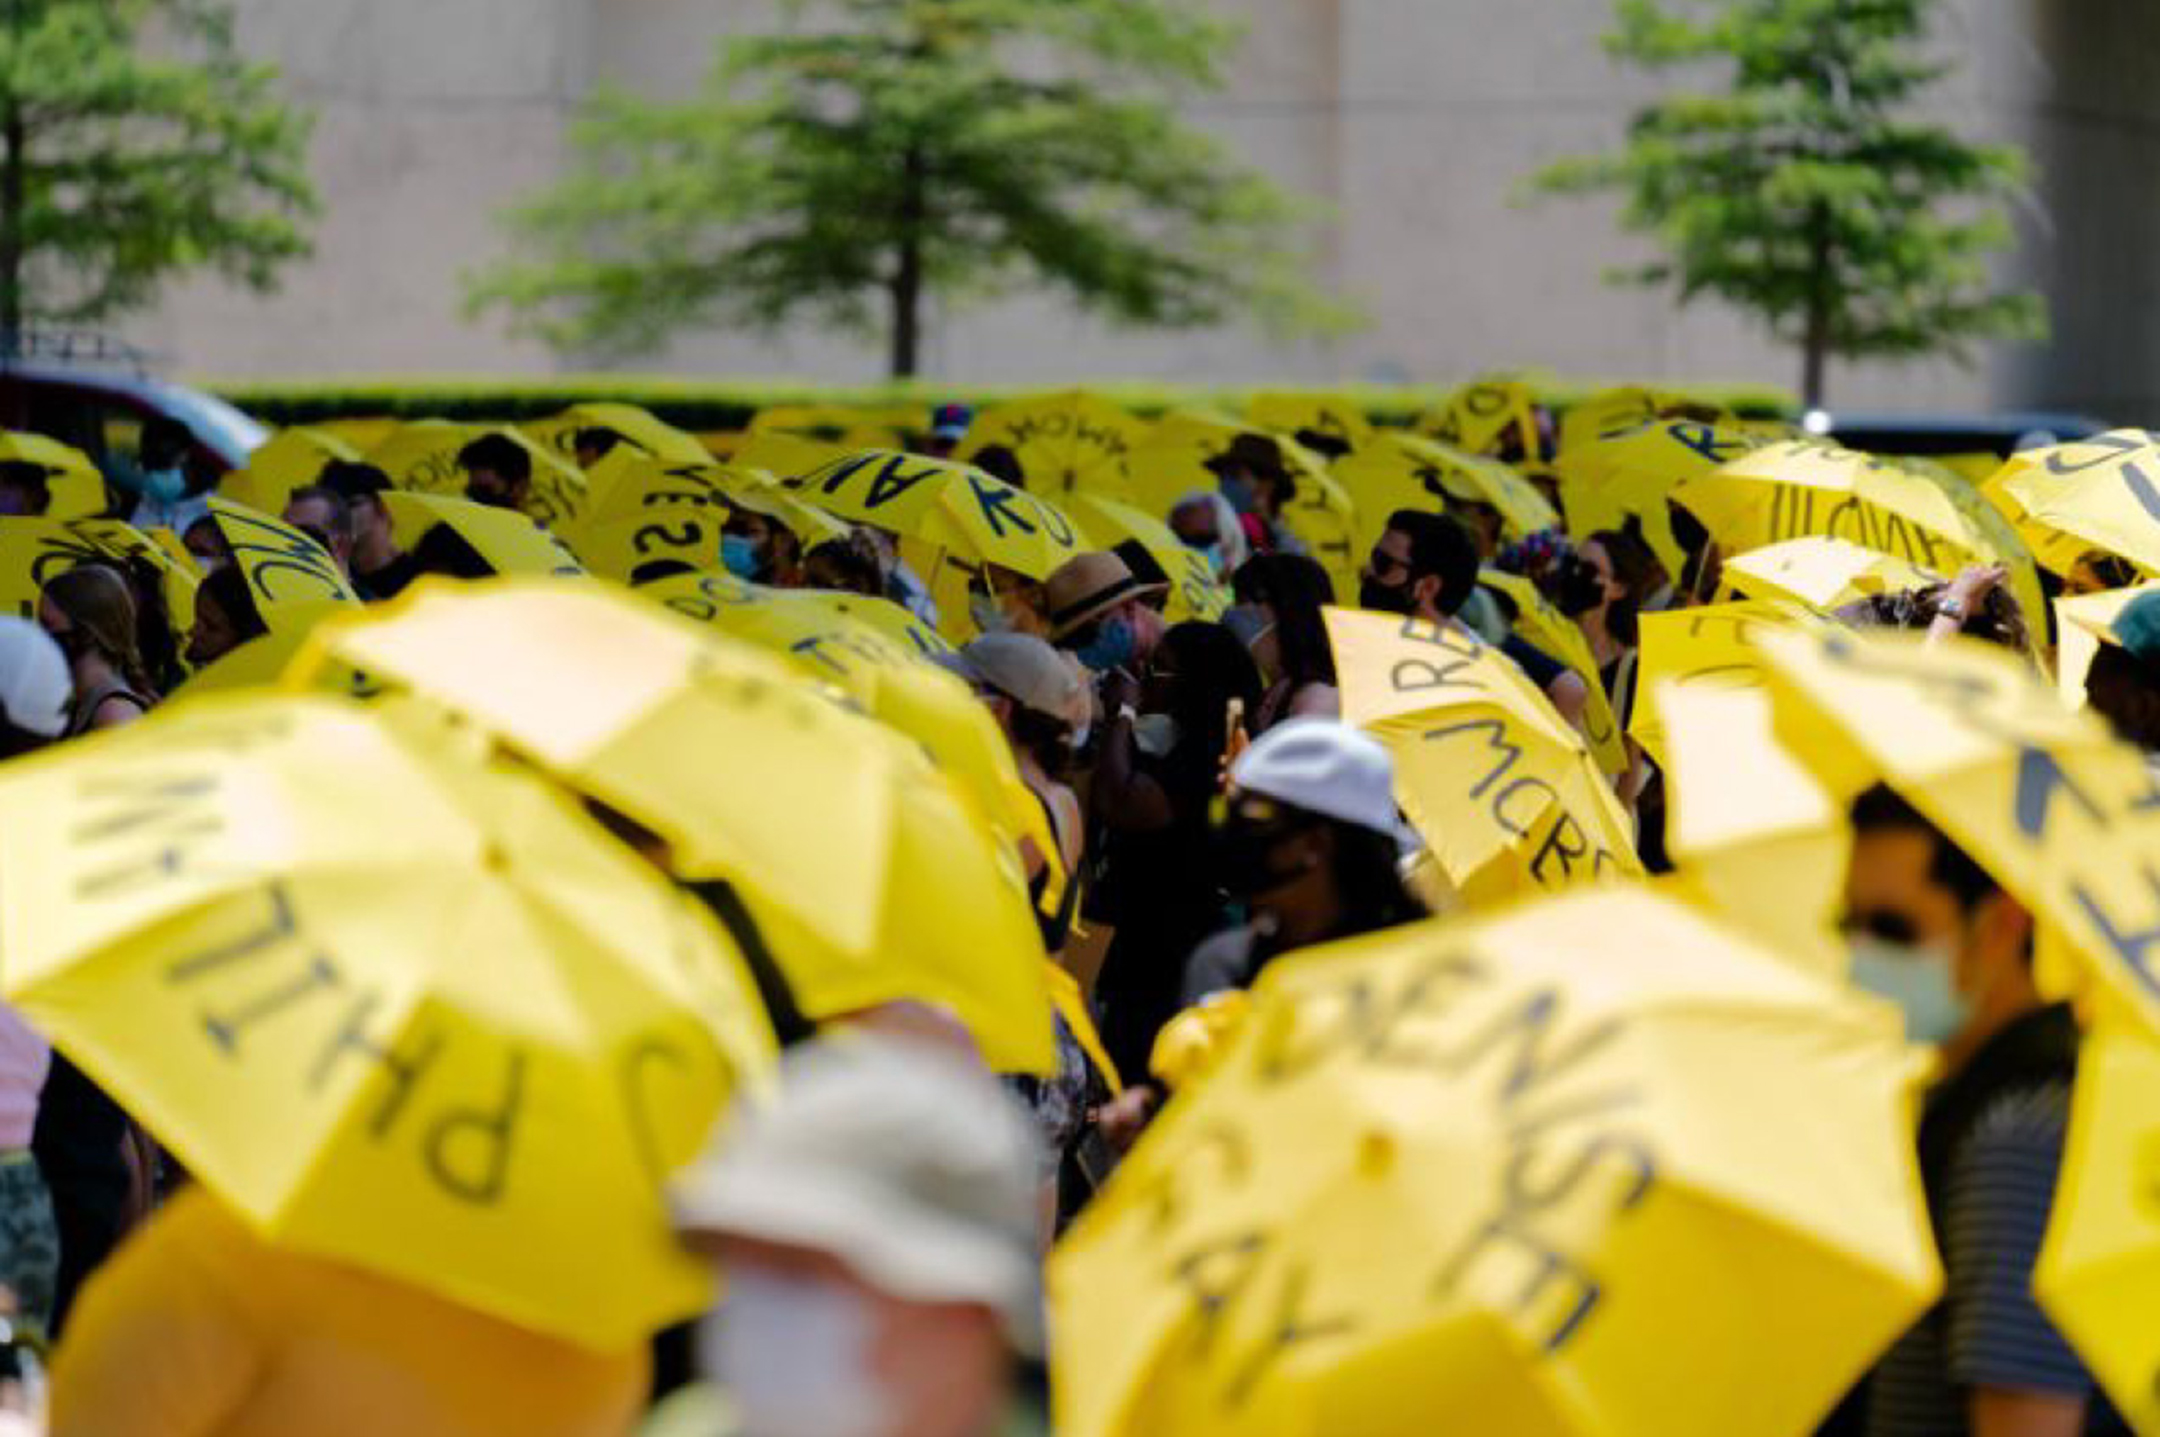 Color photograph of a crowd of protesters with yellow umbrellas